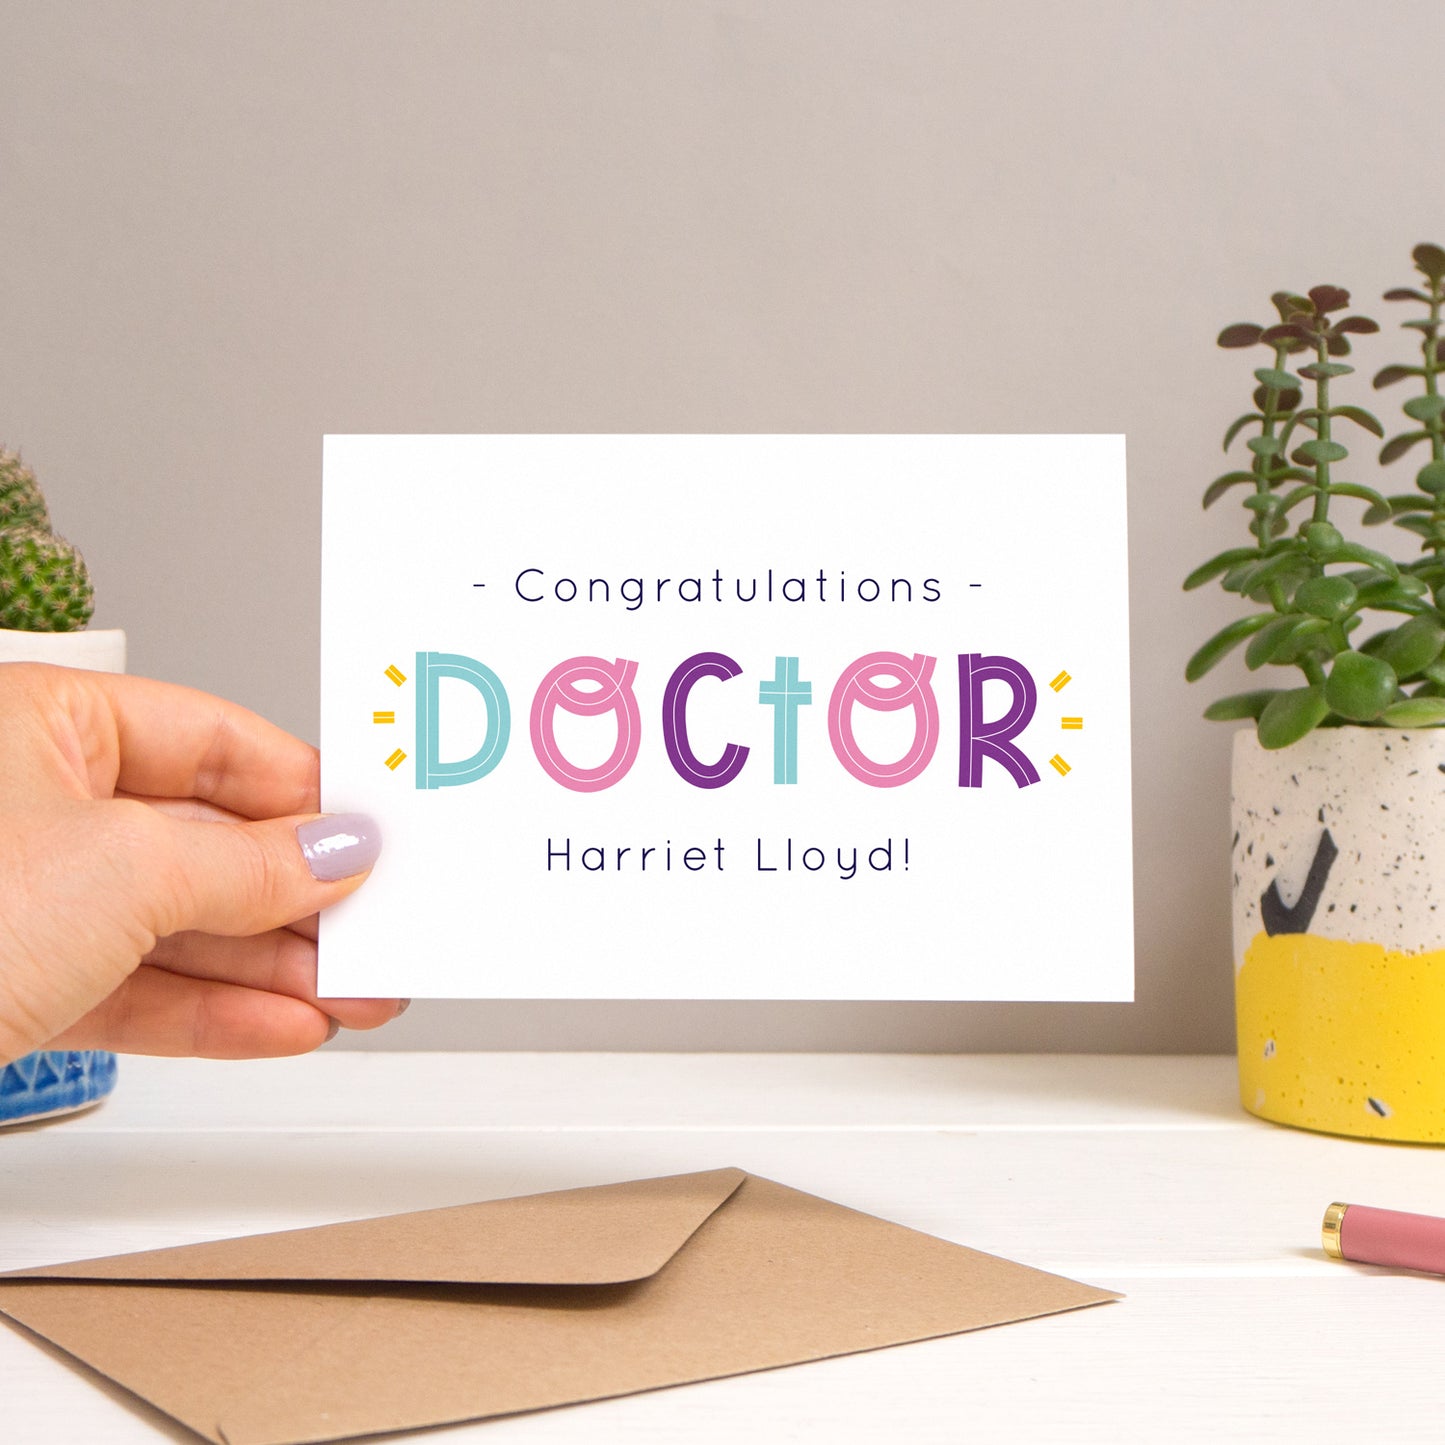 A personalised doctor card held over a warm grey and white background with potted plants peeping the sides. Behind the card is a kraft brown envelope that comes with the card. The text on this version of the card is in varying tones of navy and pink, purple and blue.